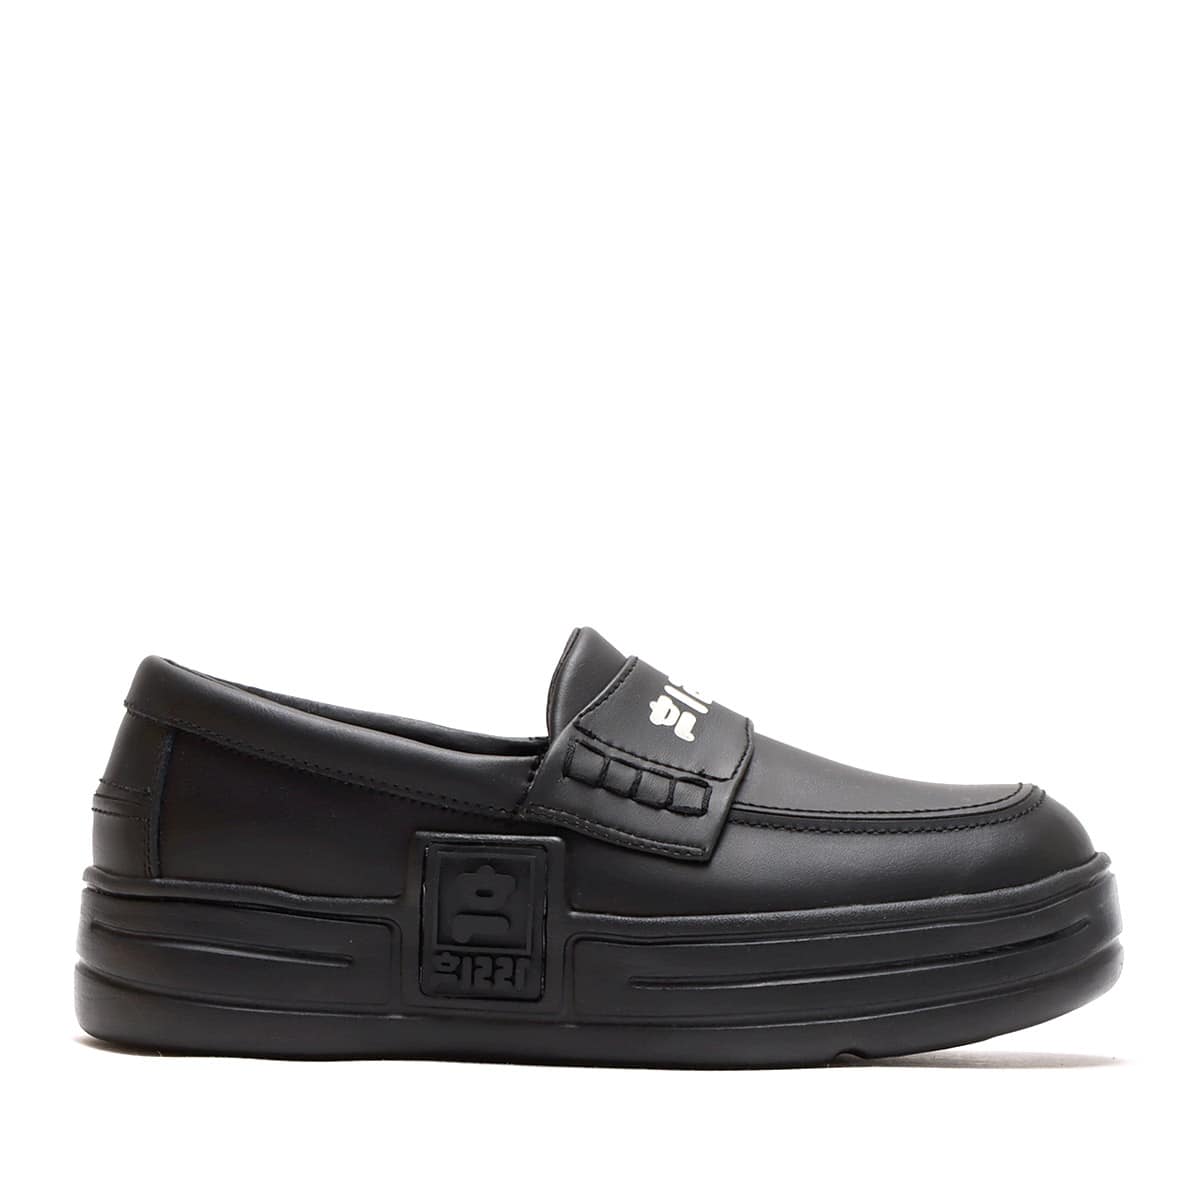 FILA FUNKY TENNIS LOAFER x pushBUTTON BLK 21FW-I